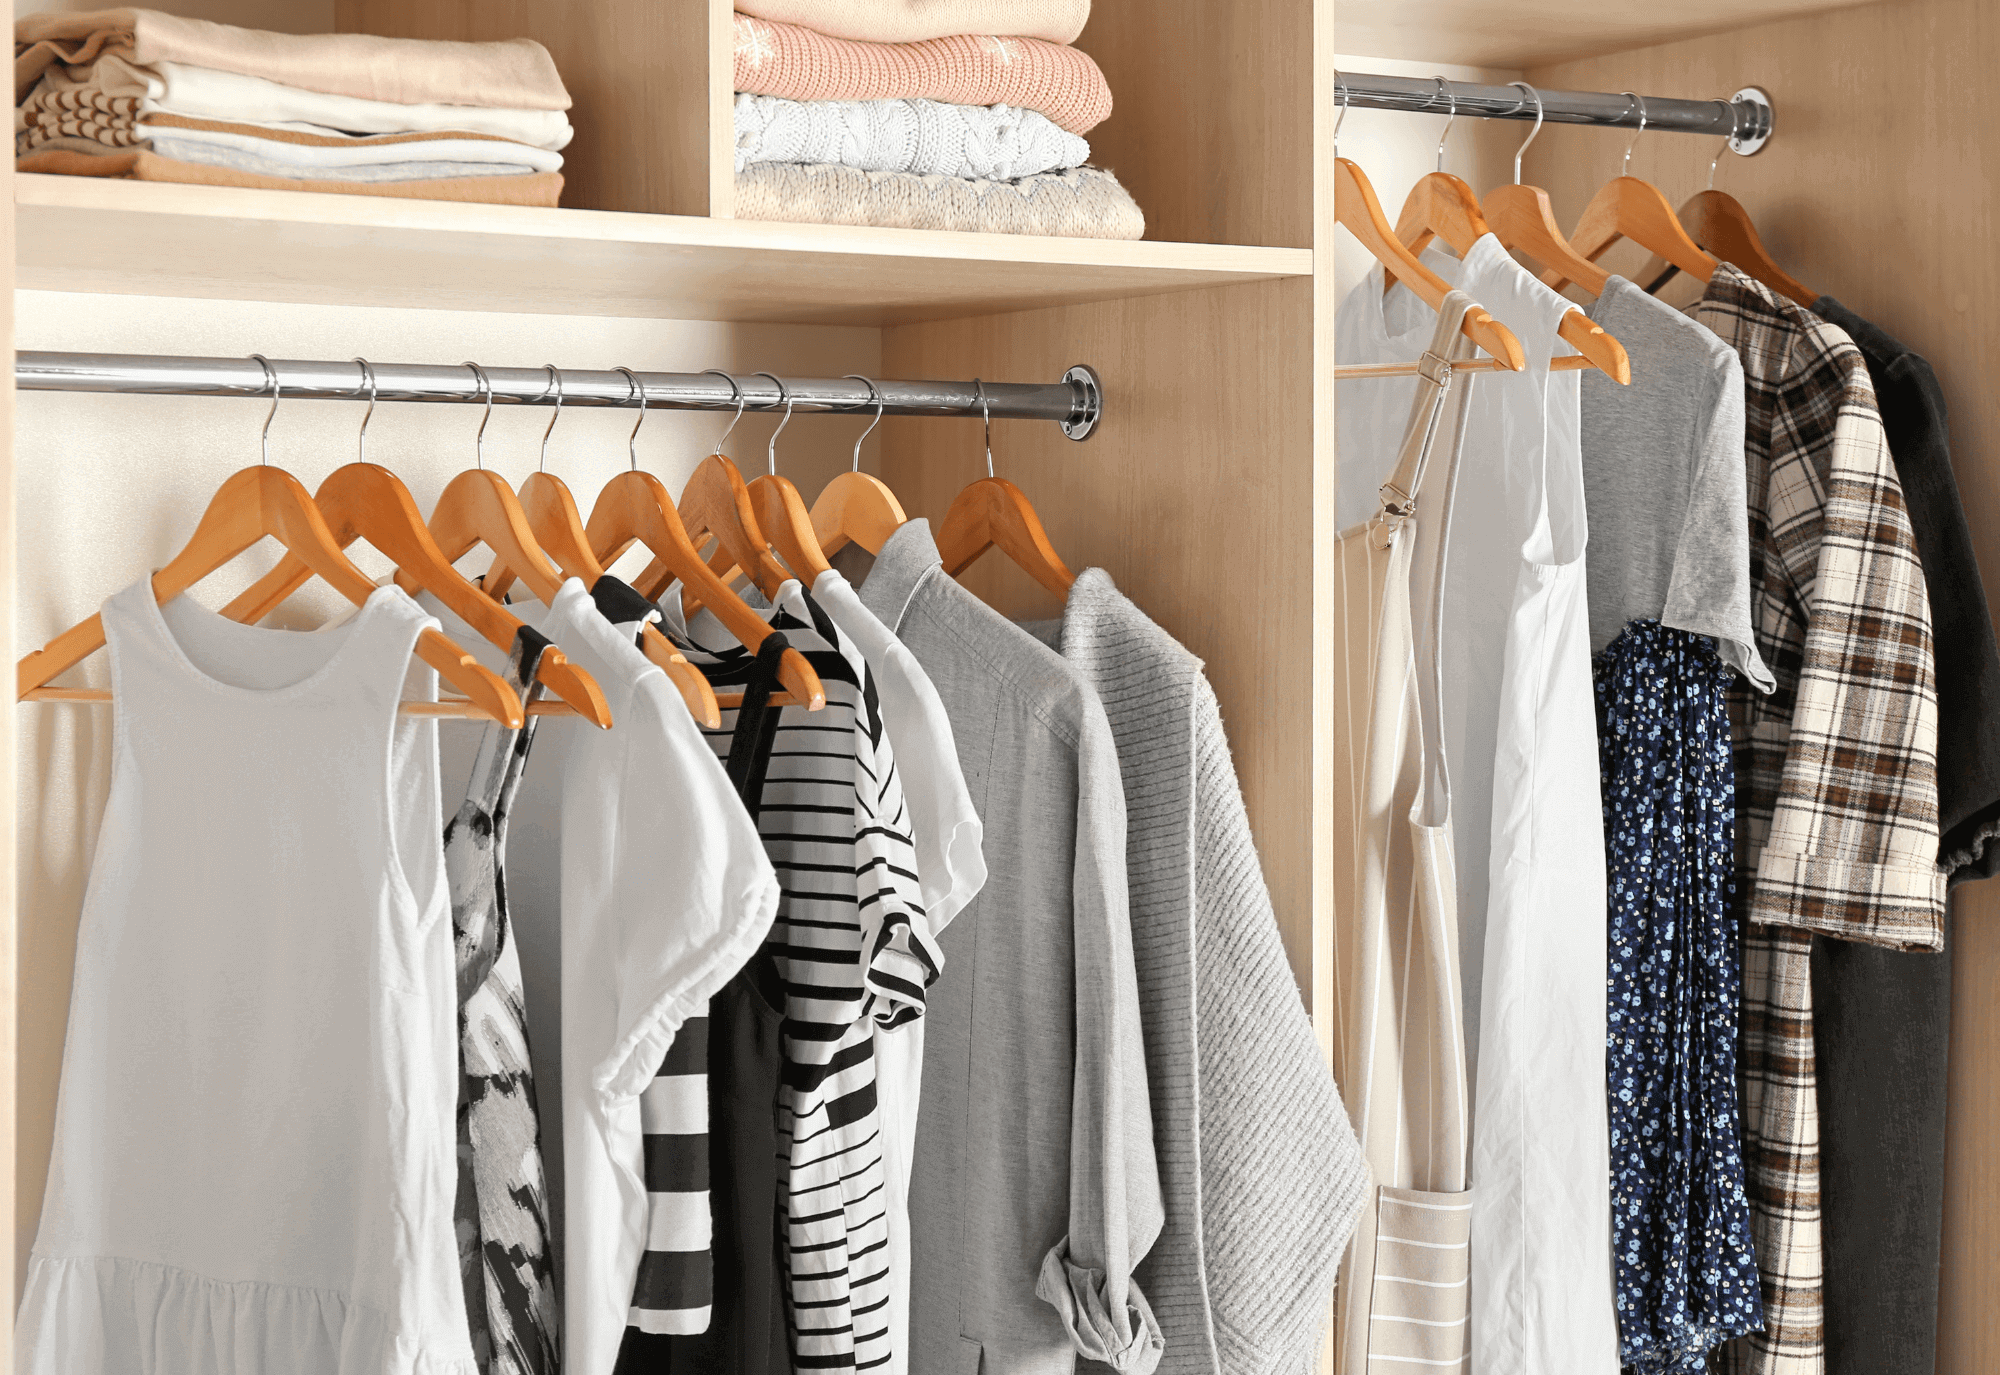 How to Organize a Small Closet with Lots of Clothes